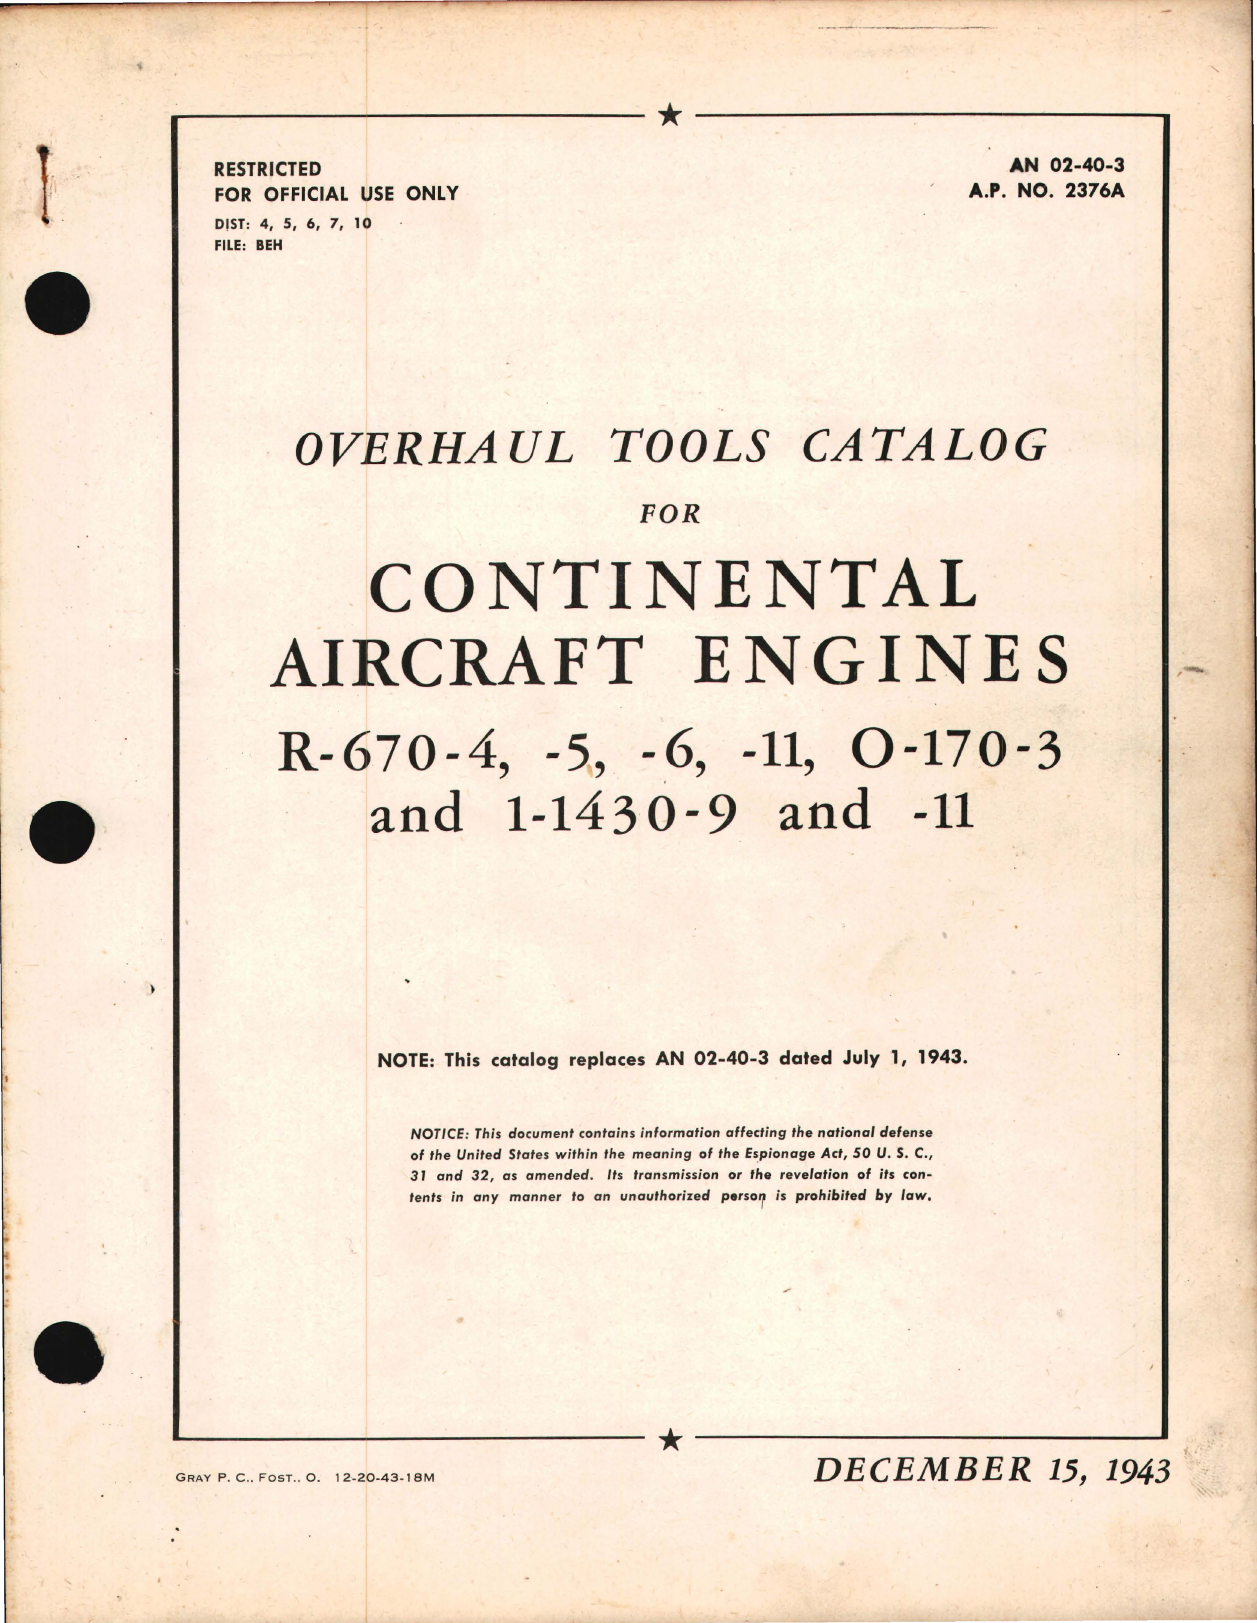 Sample page 1 from AirCorps Library document: Overhaul Tools Catalog for Continental Engines R-670-4, R-670-5, R-670-6, R-670-11, O-170-3, 1-1430-9, and 1-1430-11